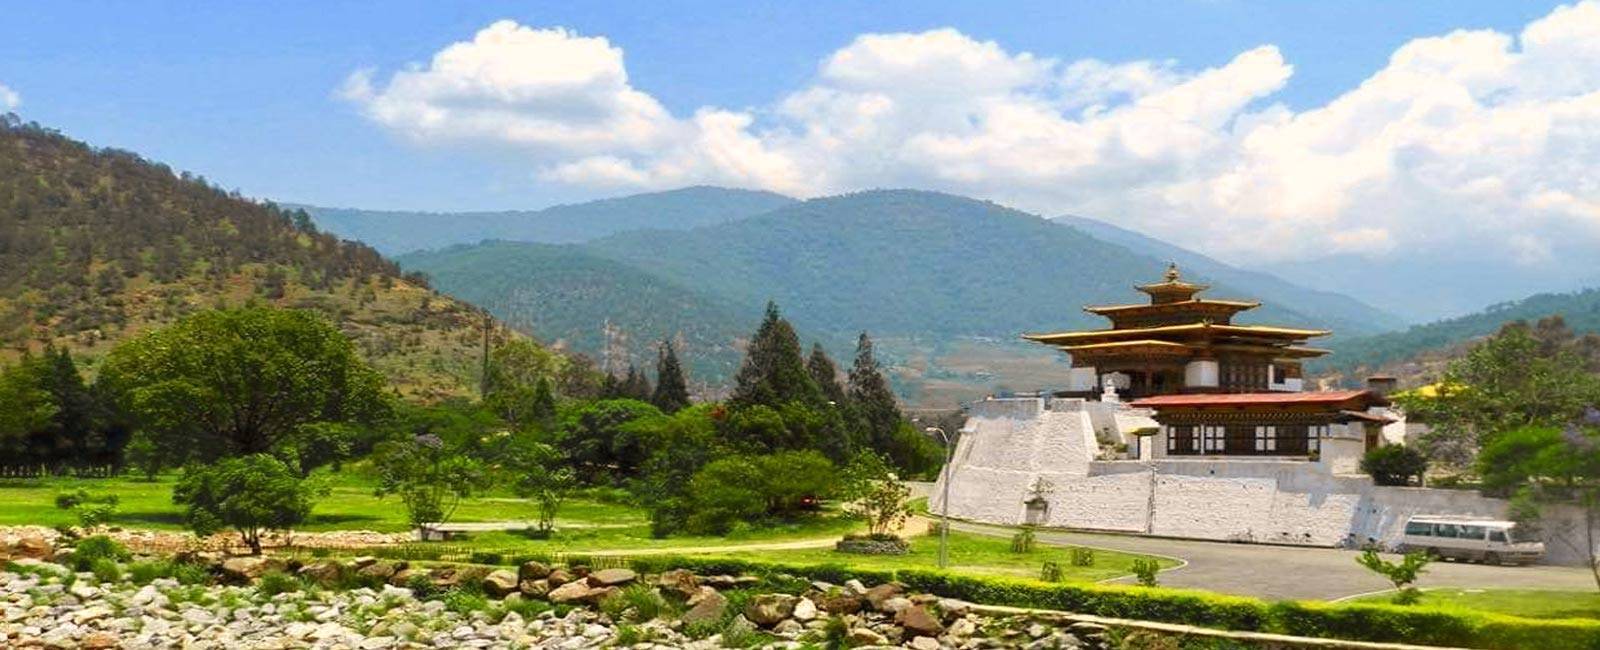 The monastery in the middle part of the grassy land at Bhutan